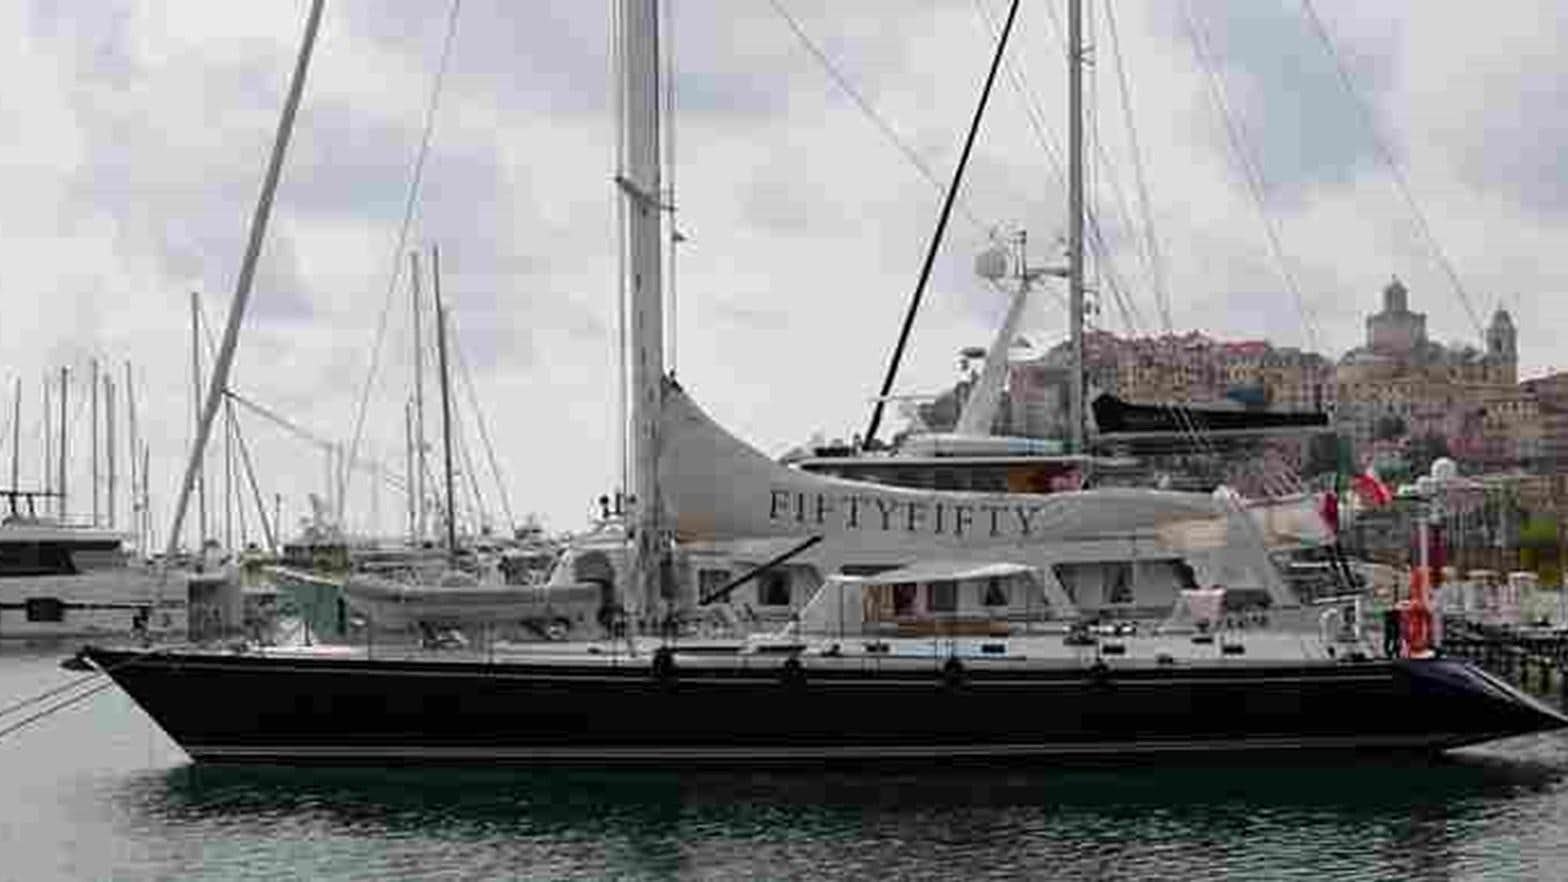 Fifty fifty
Yacht for Sale